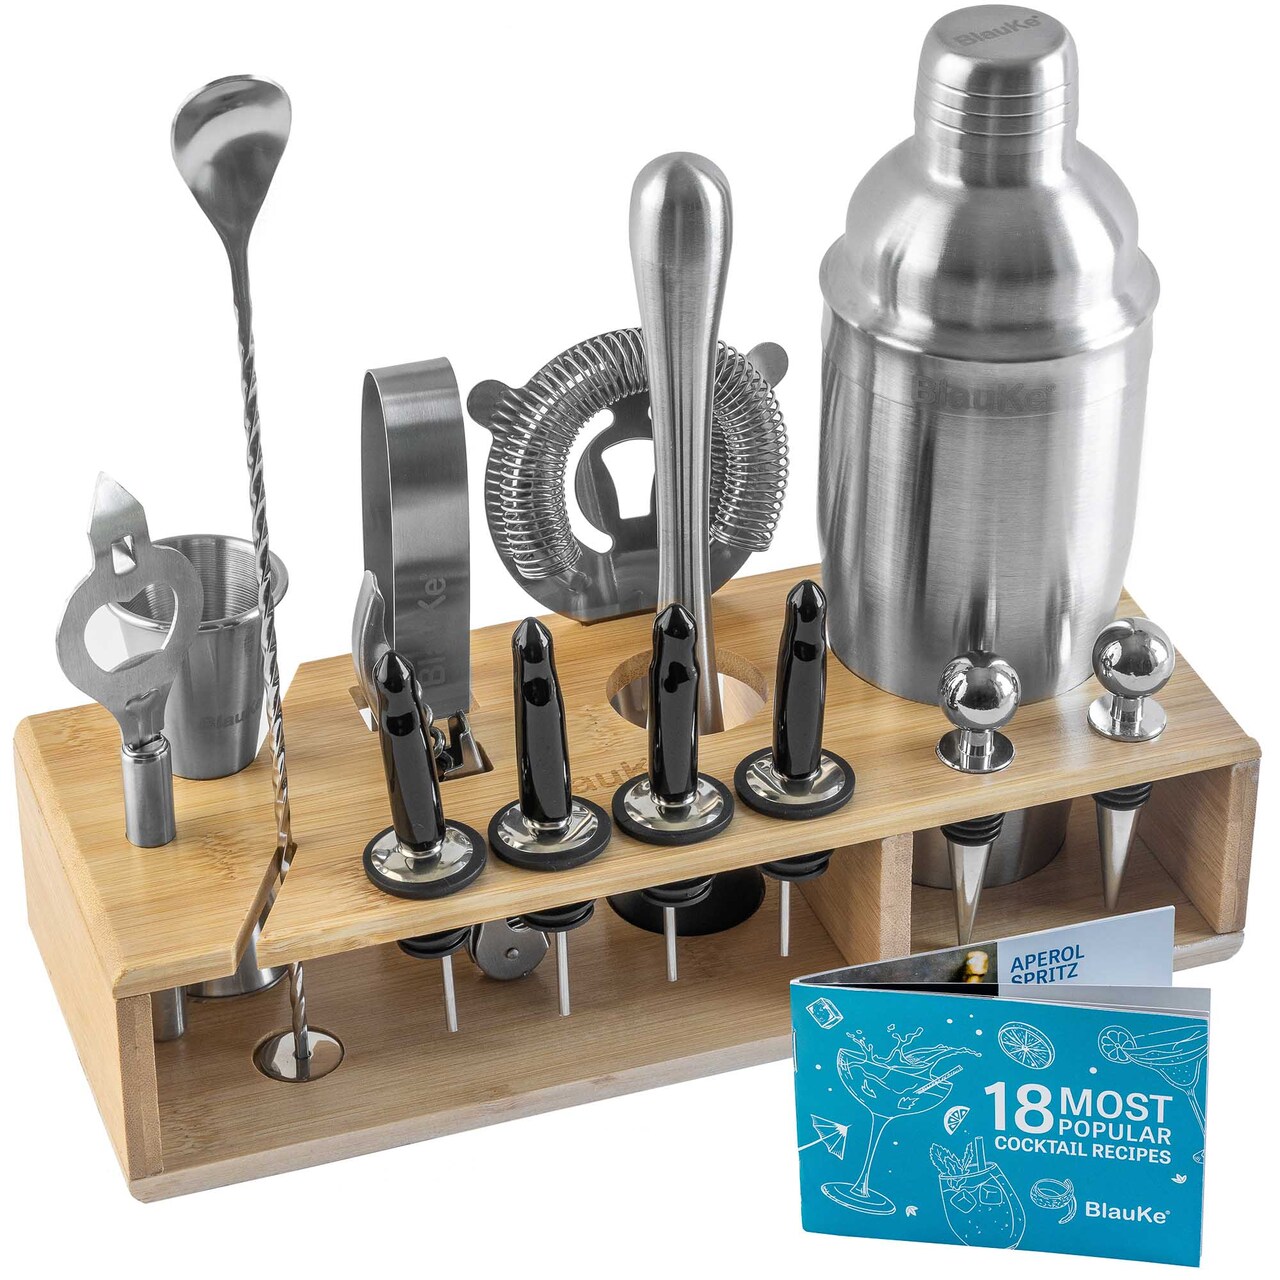 Stainless Steel Cocktail Shaker with Stand - 17-Piece Mixology Bartender Kit, Bar Set - 25oz Martini Shaker, Strainer, Muddler, Mixing | Michaels